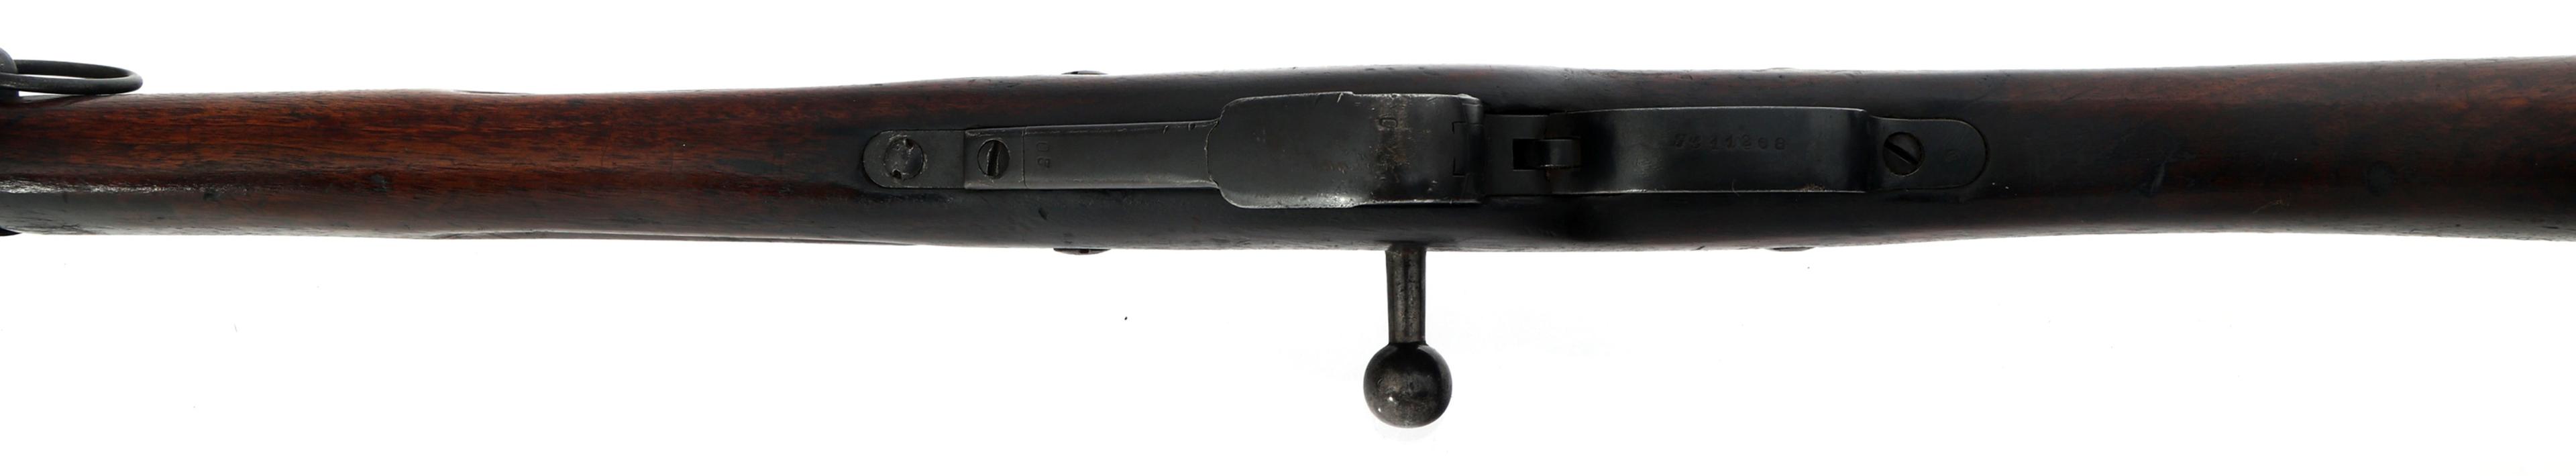 FRENCH ST ETIENNE MODEL M16 8x50mm CALIBER RIFLE